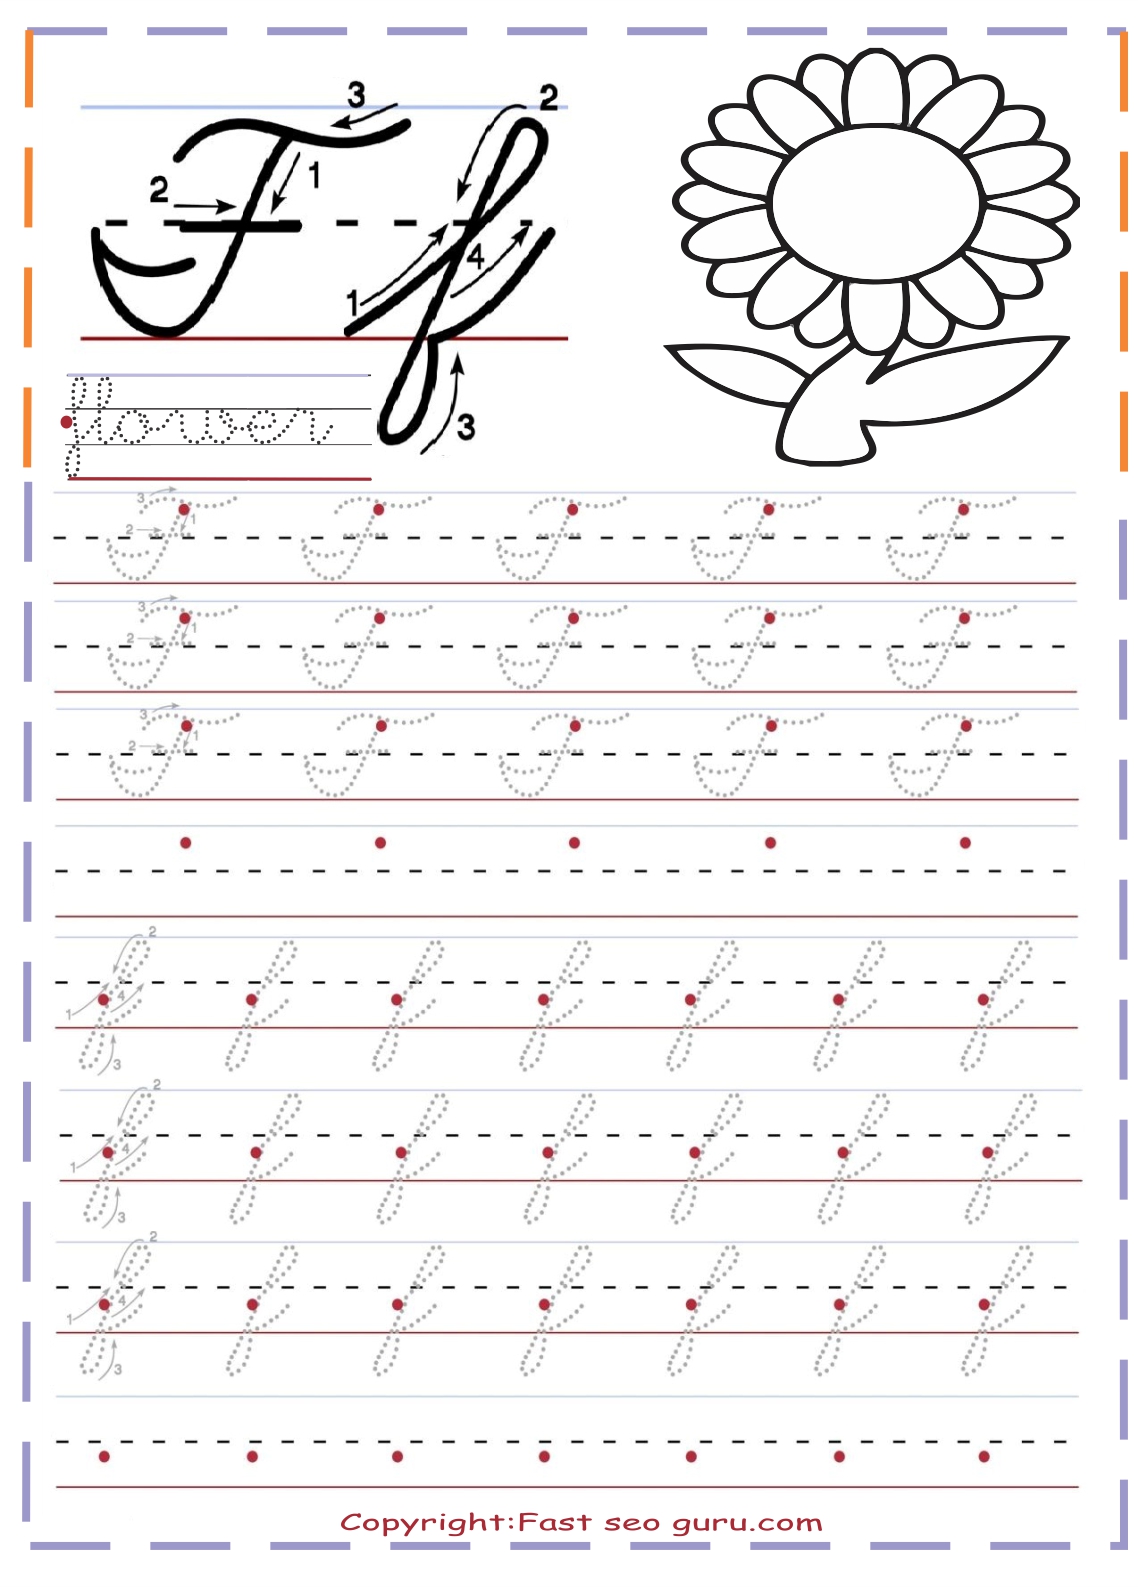 cursive handwriting tracing worksheets for practice letter F